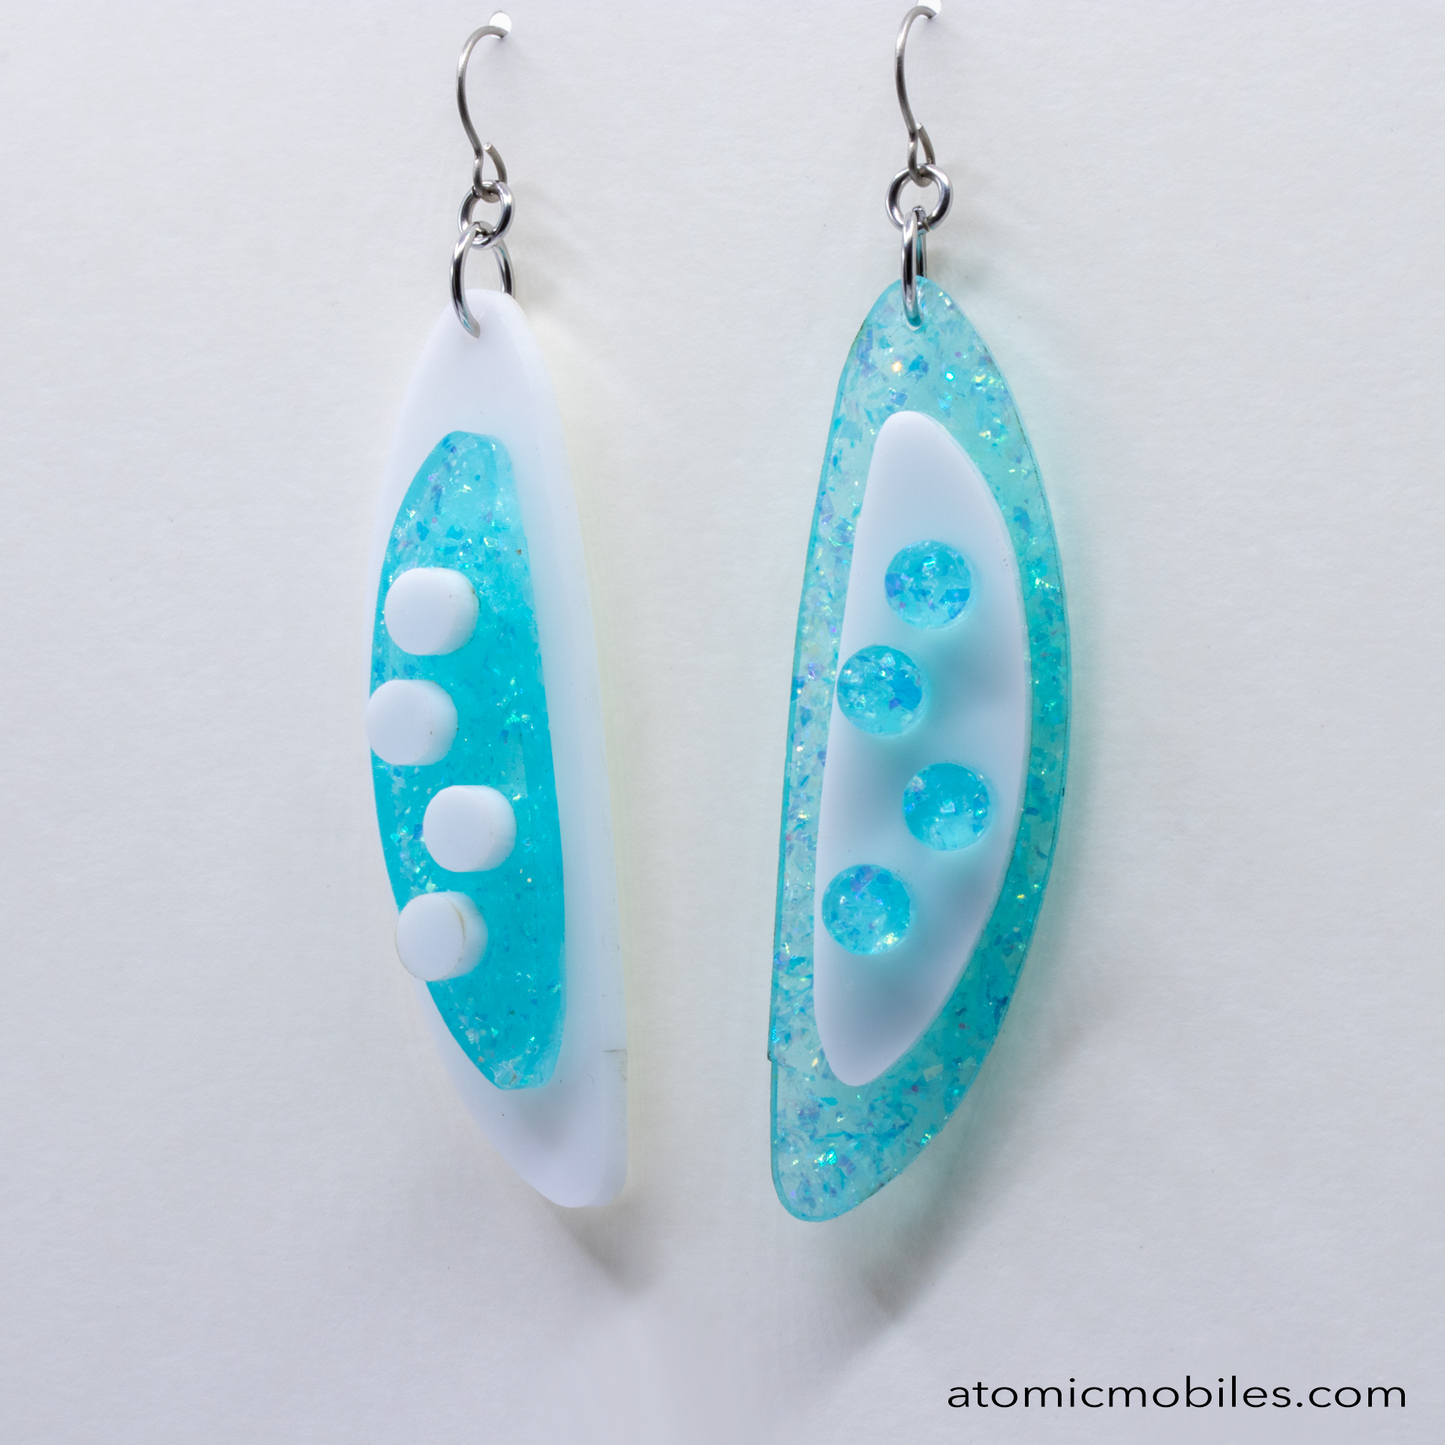 POPdots modern retro statement earrings in Sparkly Aqua Blue and White acrylic by AtomicMobiles.com